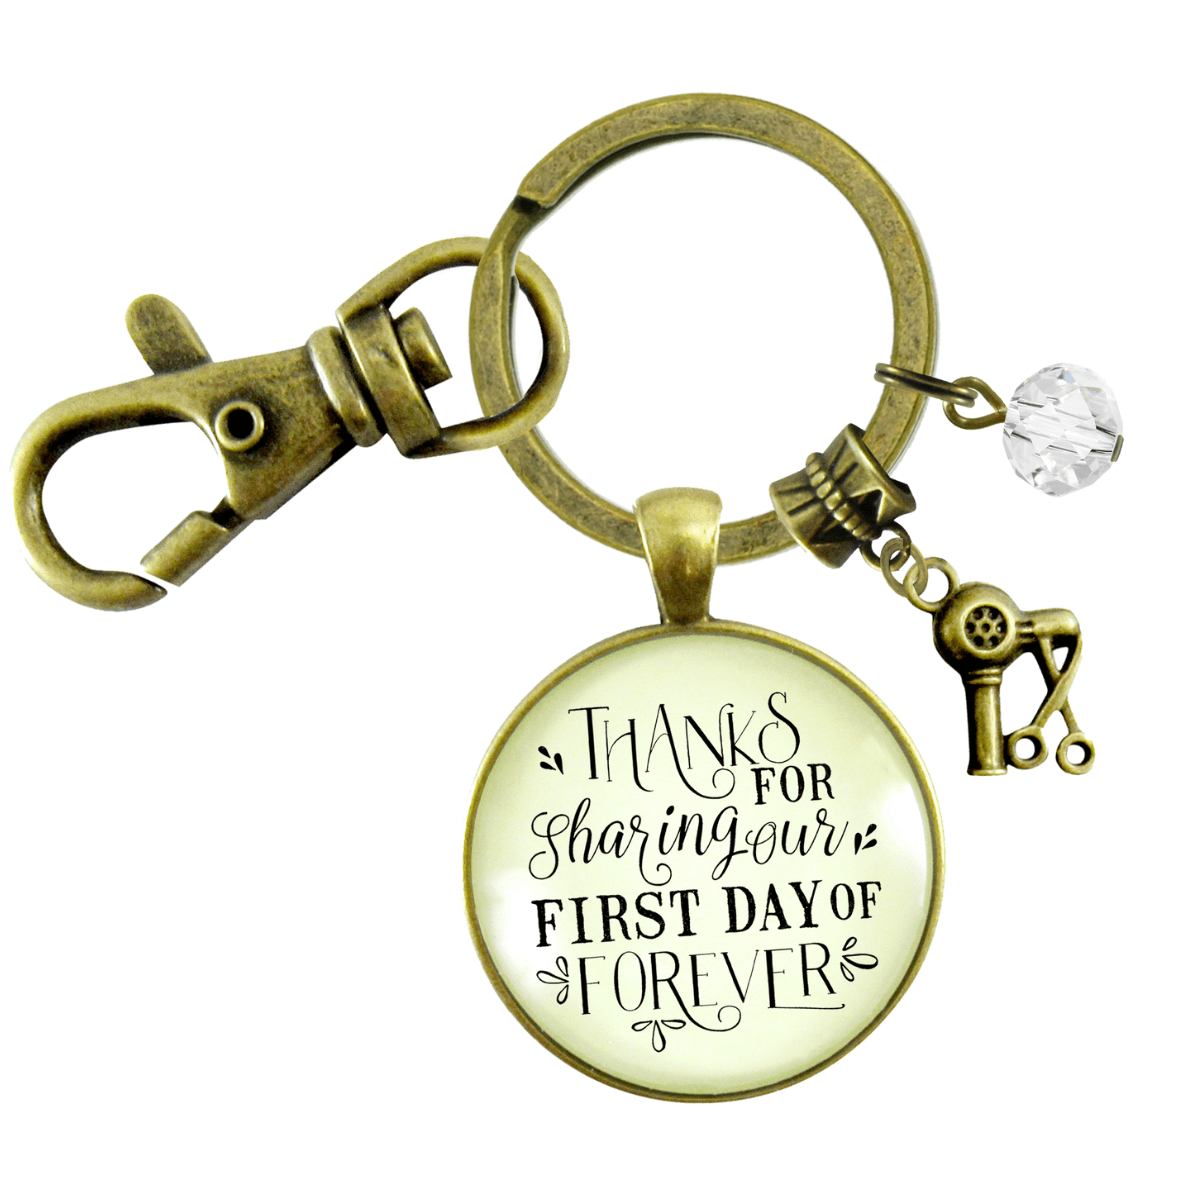 Wedding Hairdresser Gift Keychain Thanks For Sharing Our Day Hairdryer Stylist - Gutsy Goodness